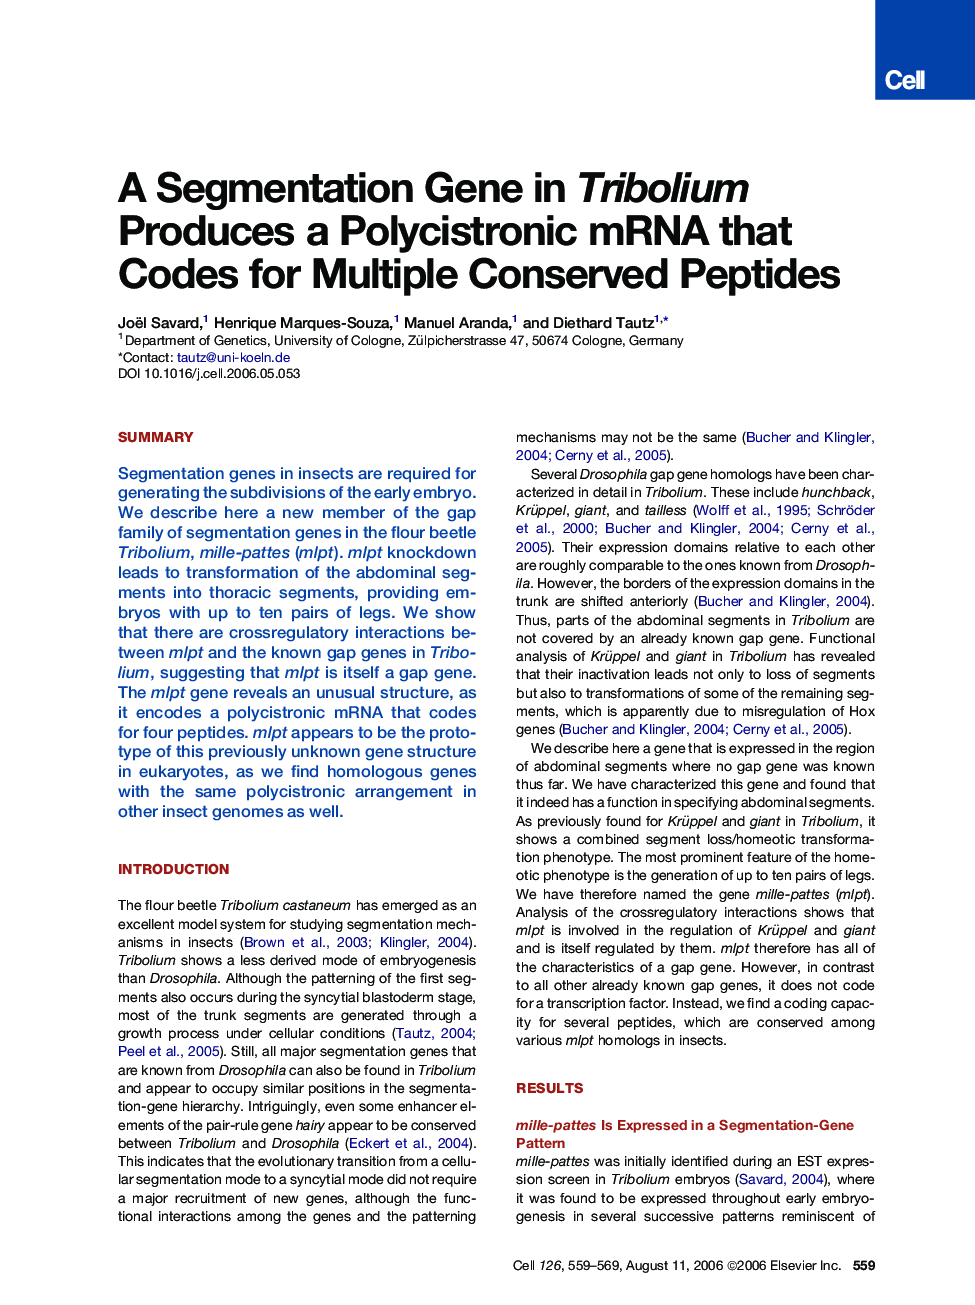 A Segmentation Gene in Tribolium Produces a Polycistronic mRNA that Codes for Multiple Conserved Peptides